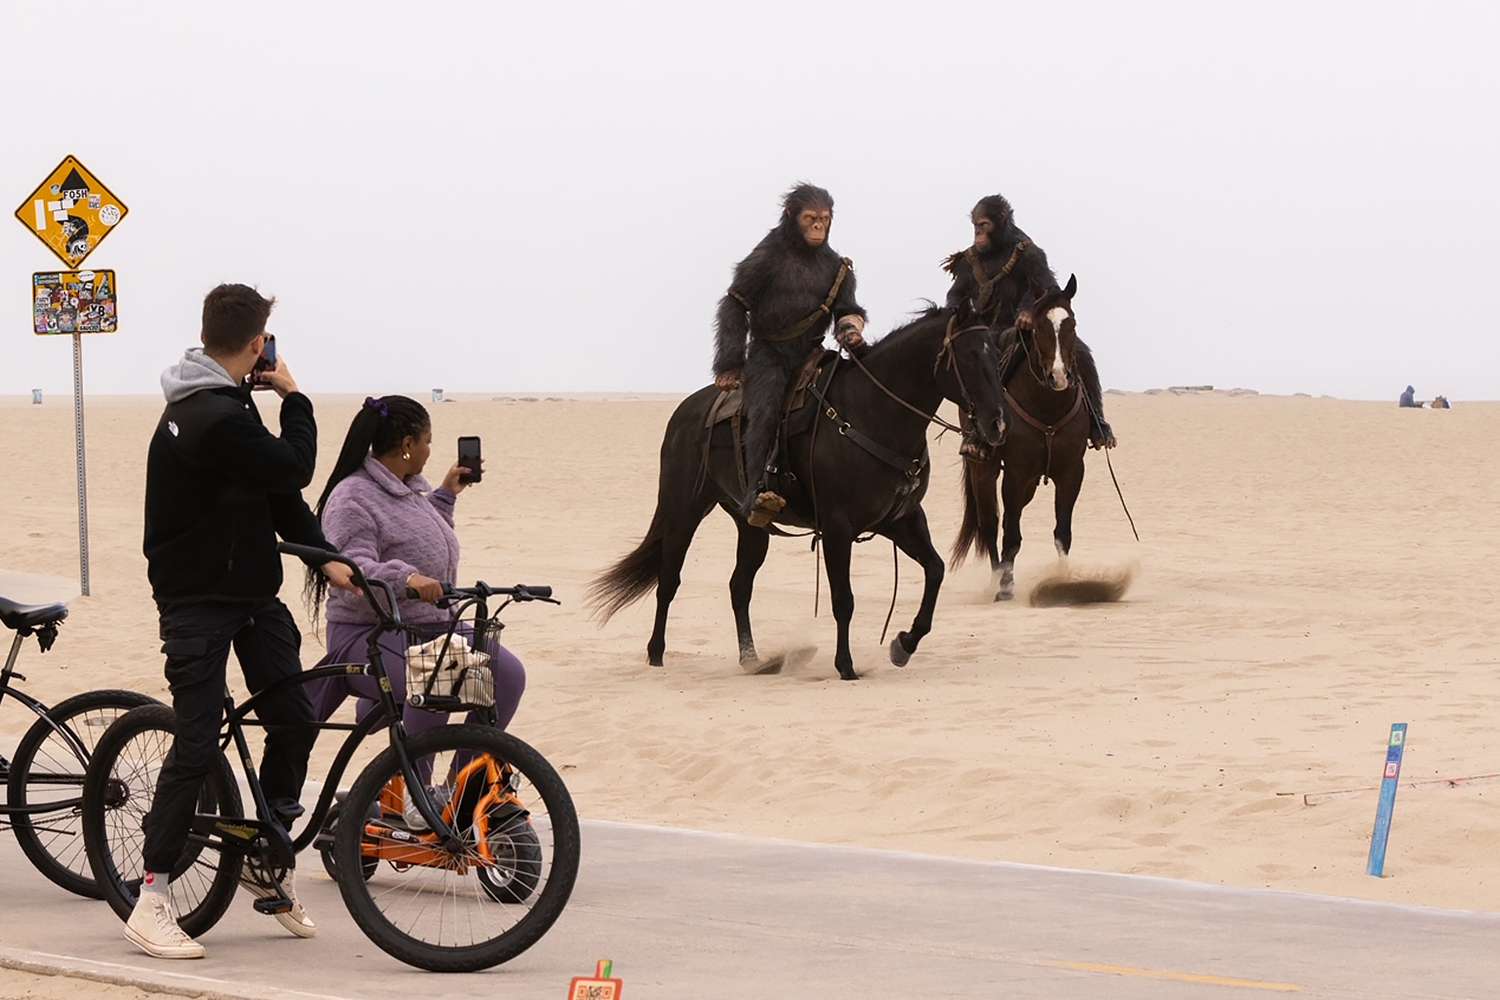 New Planet of the Apes Movie Appears to Send People Dressed as Apes on Horses to Los Angeles